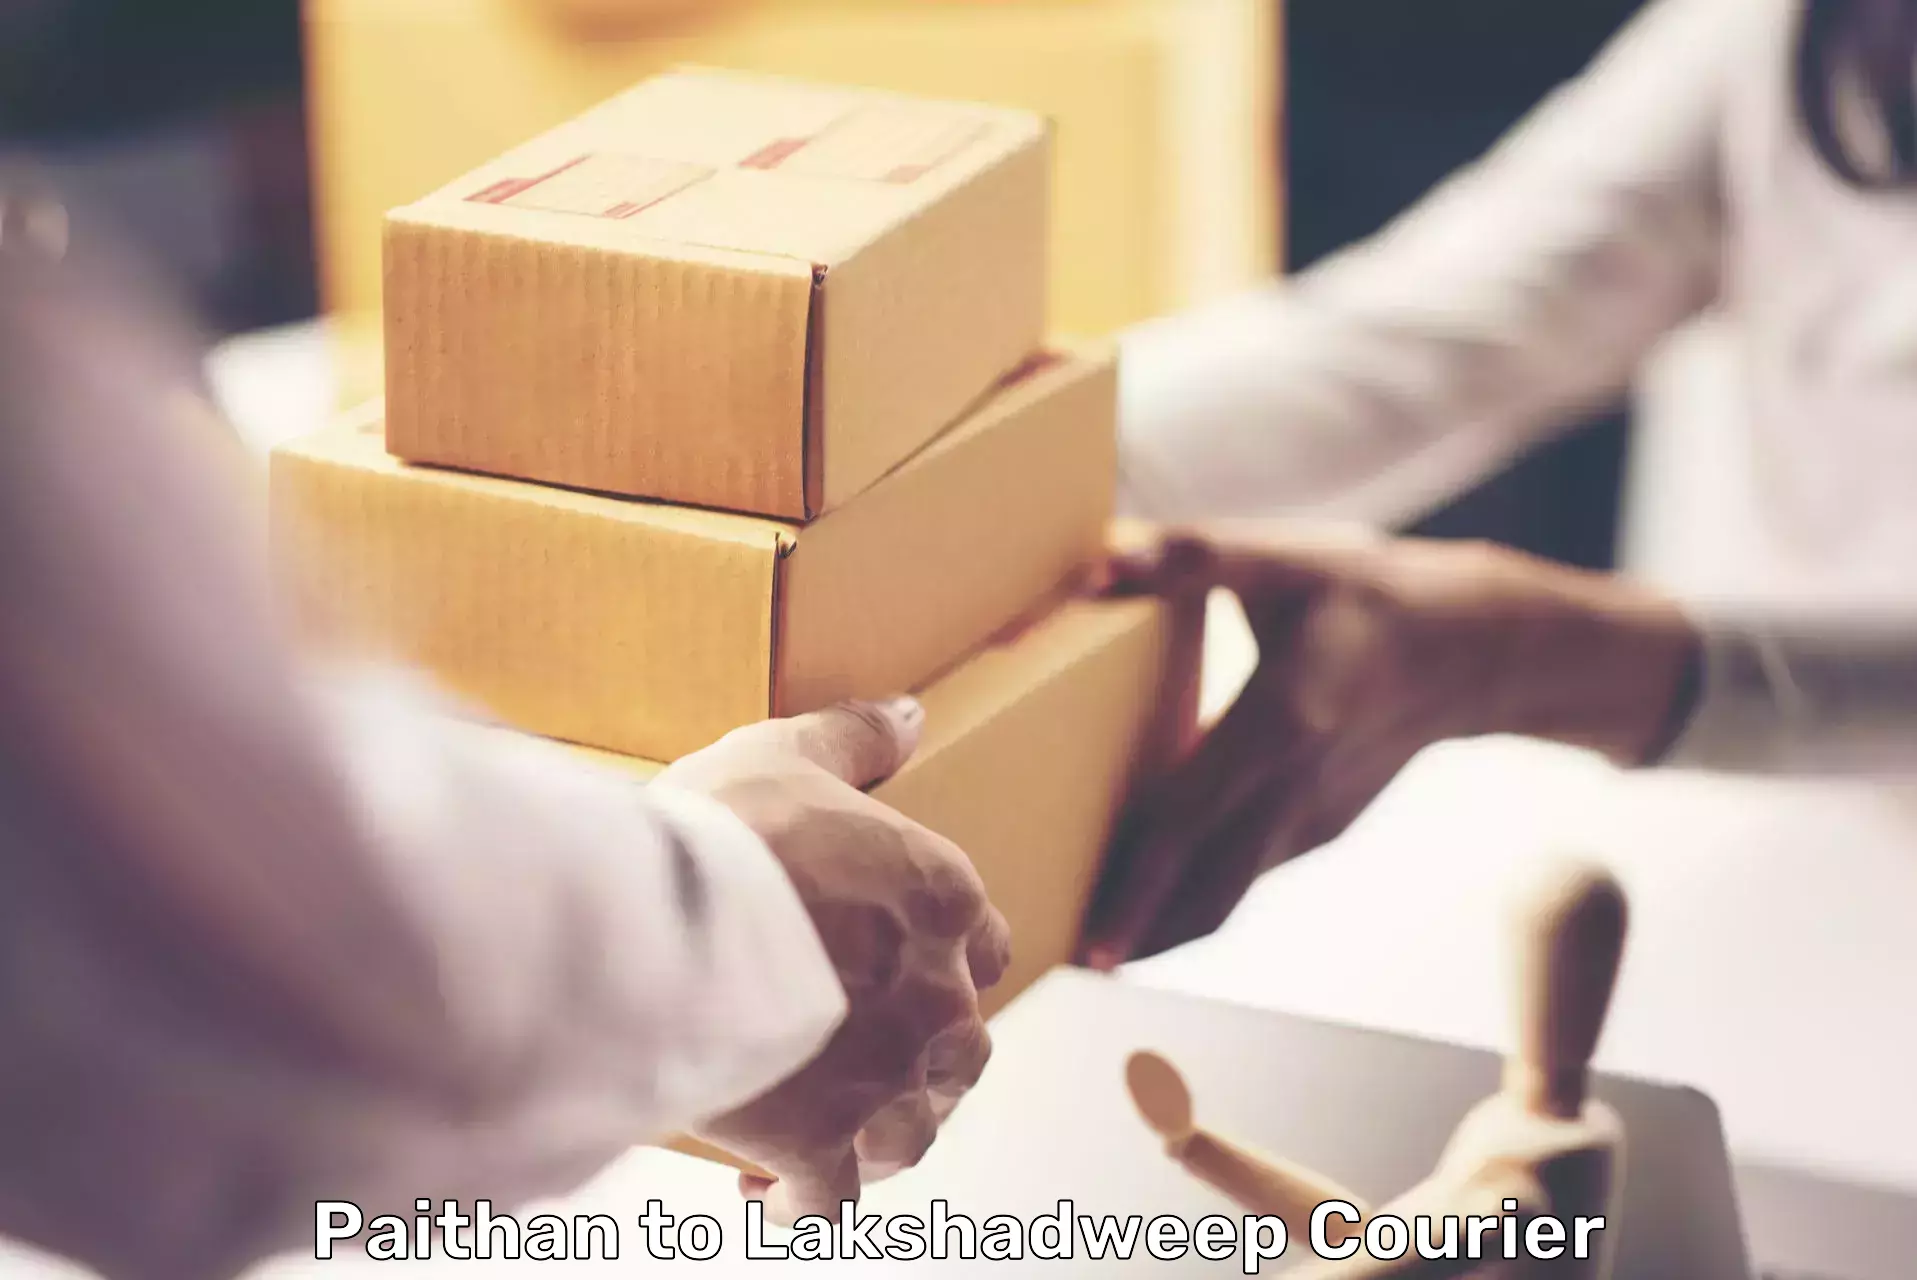 On-call courier service Paithan to Lakshadweep